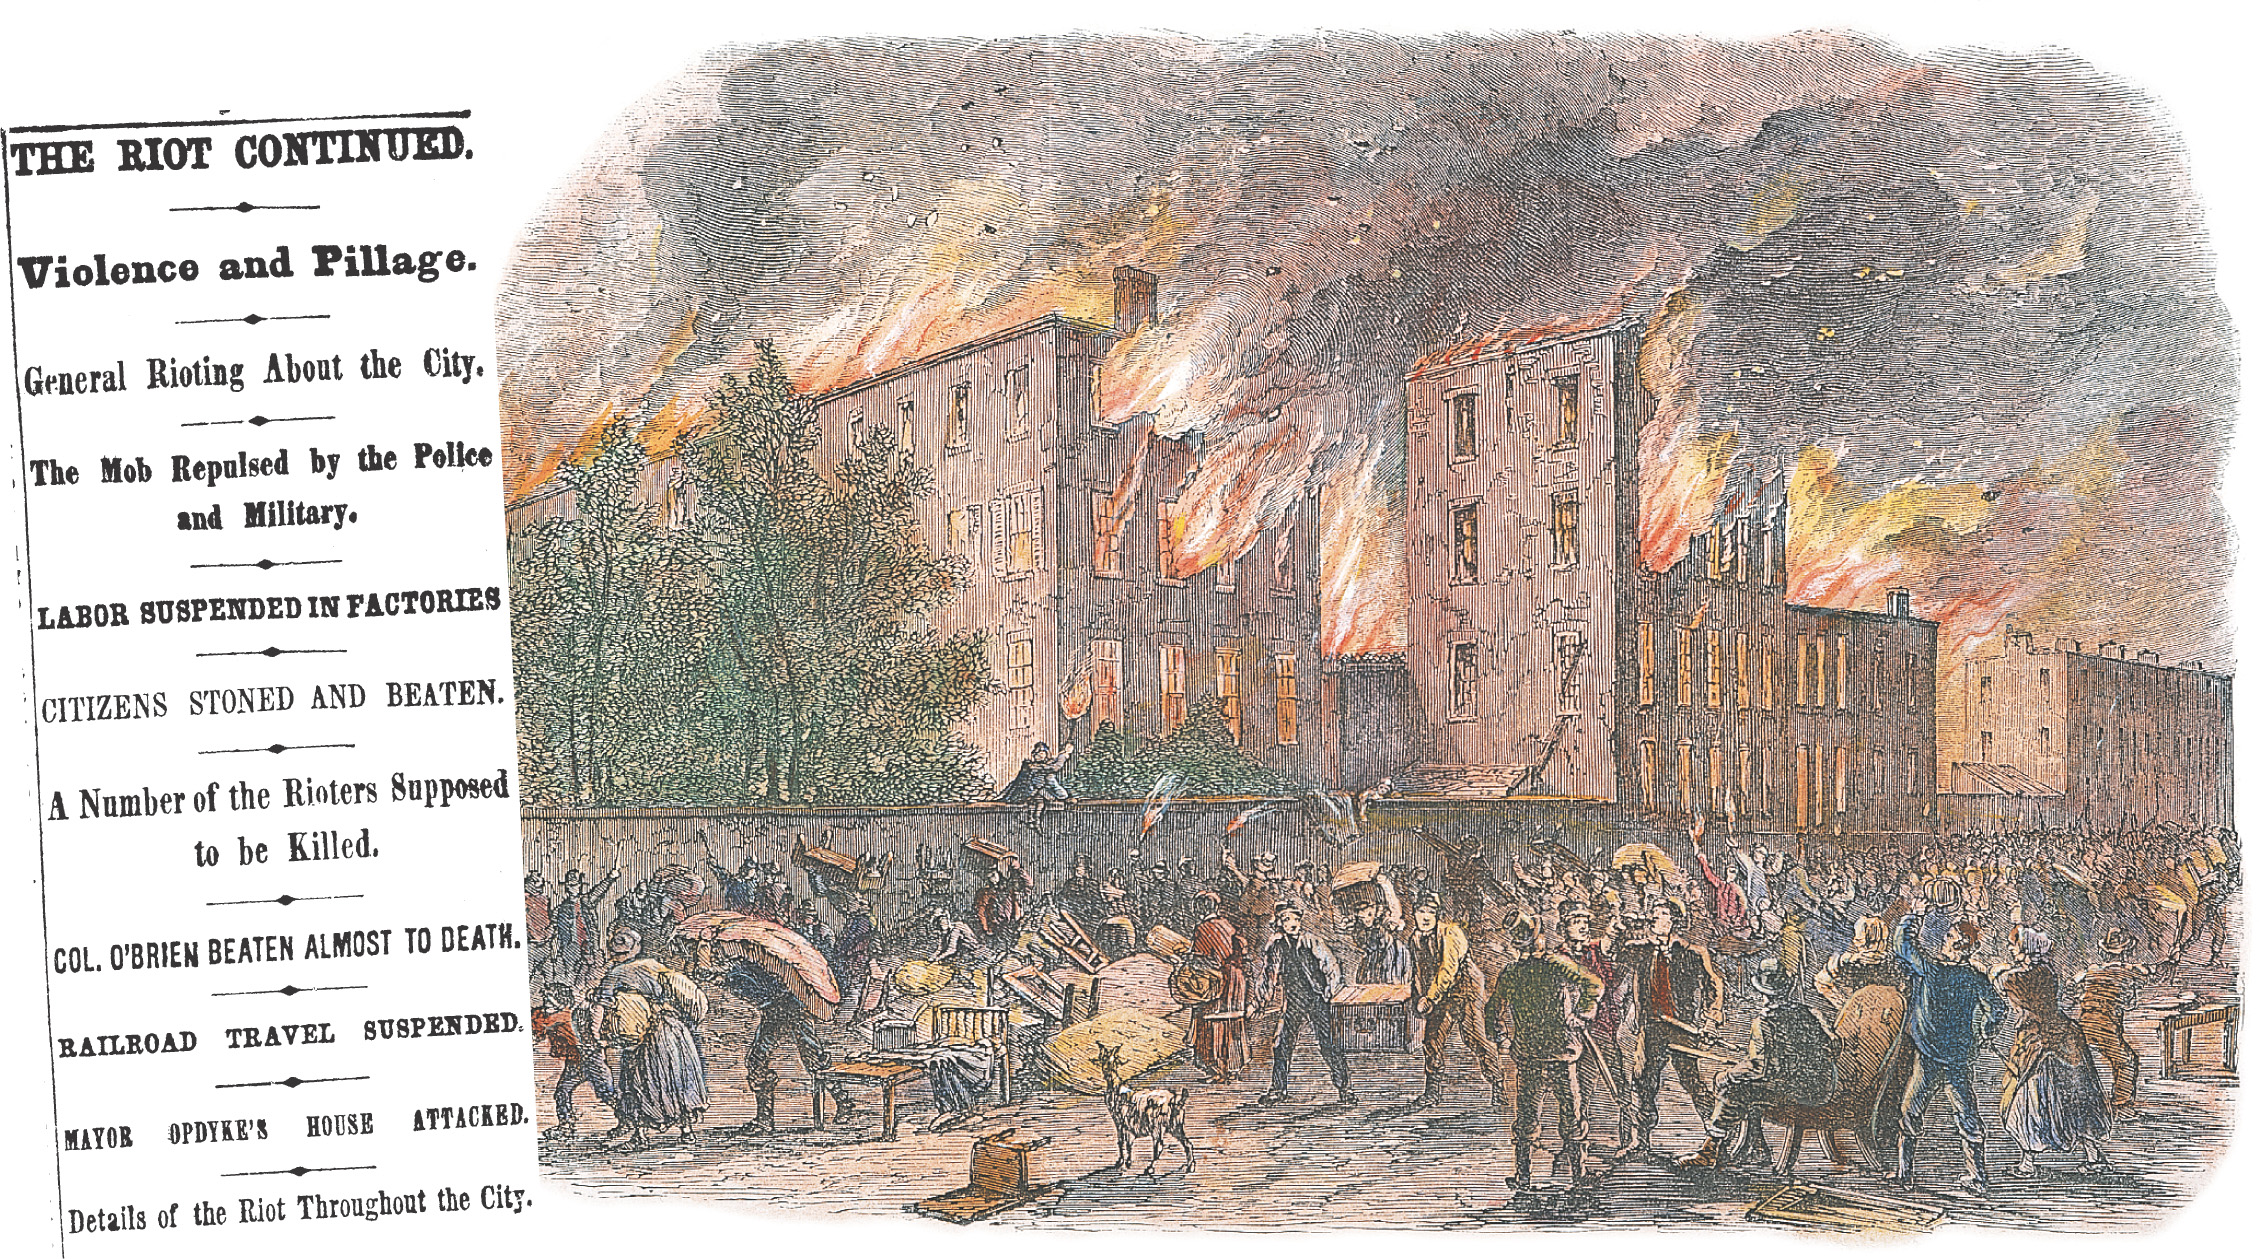 A painting shows people hurrying out of burning buildings. Newspaper headlines read The Riot Continued. Violence and Pillage. General Rioting About the City. The Mob Repulsed by Police and Military. Citizens Stoned and Beaten. A Number of the Rioters Supposed to be Killed.